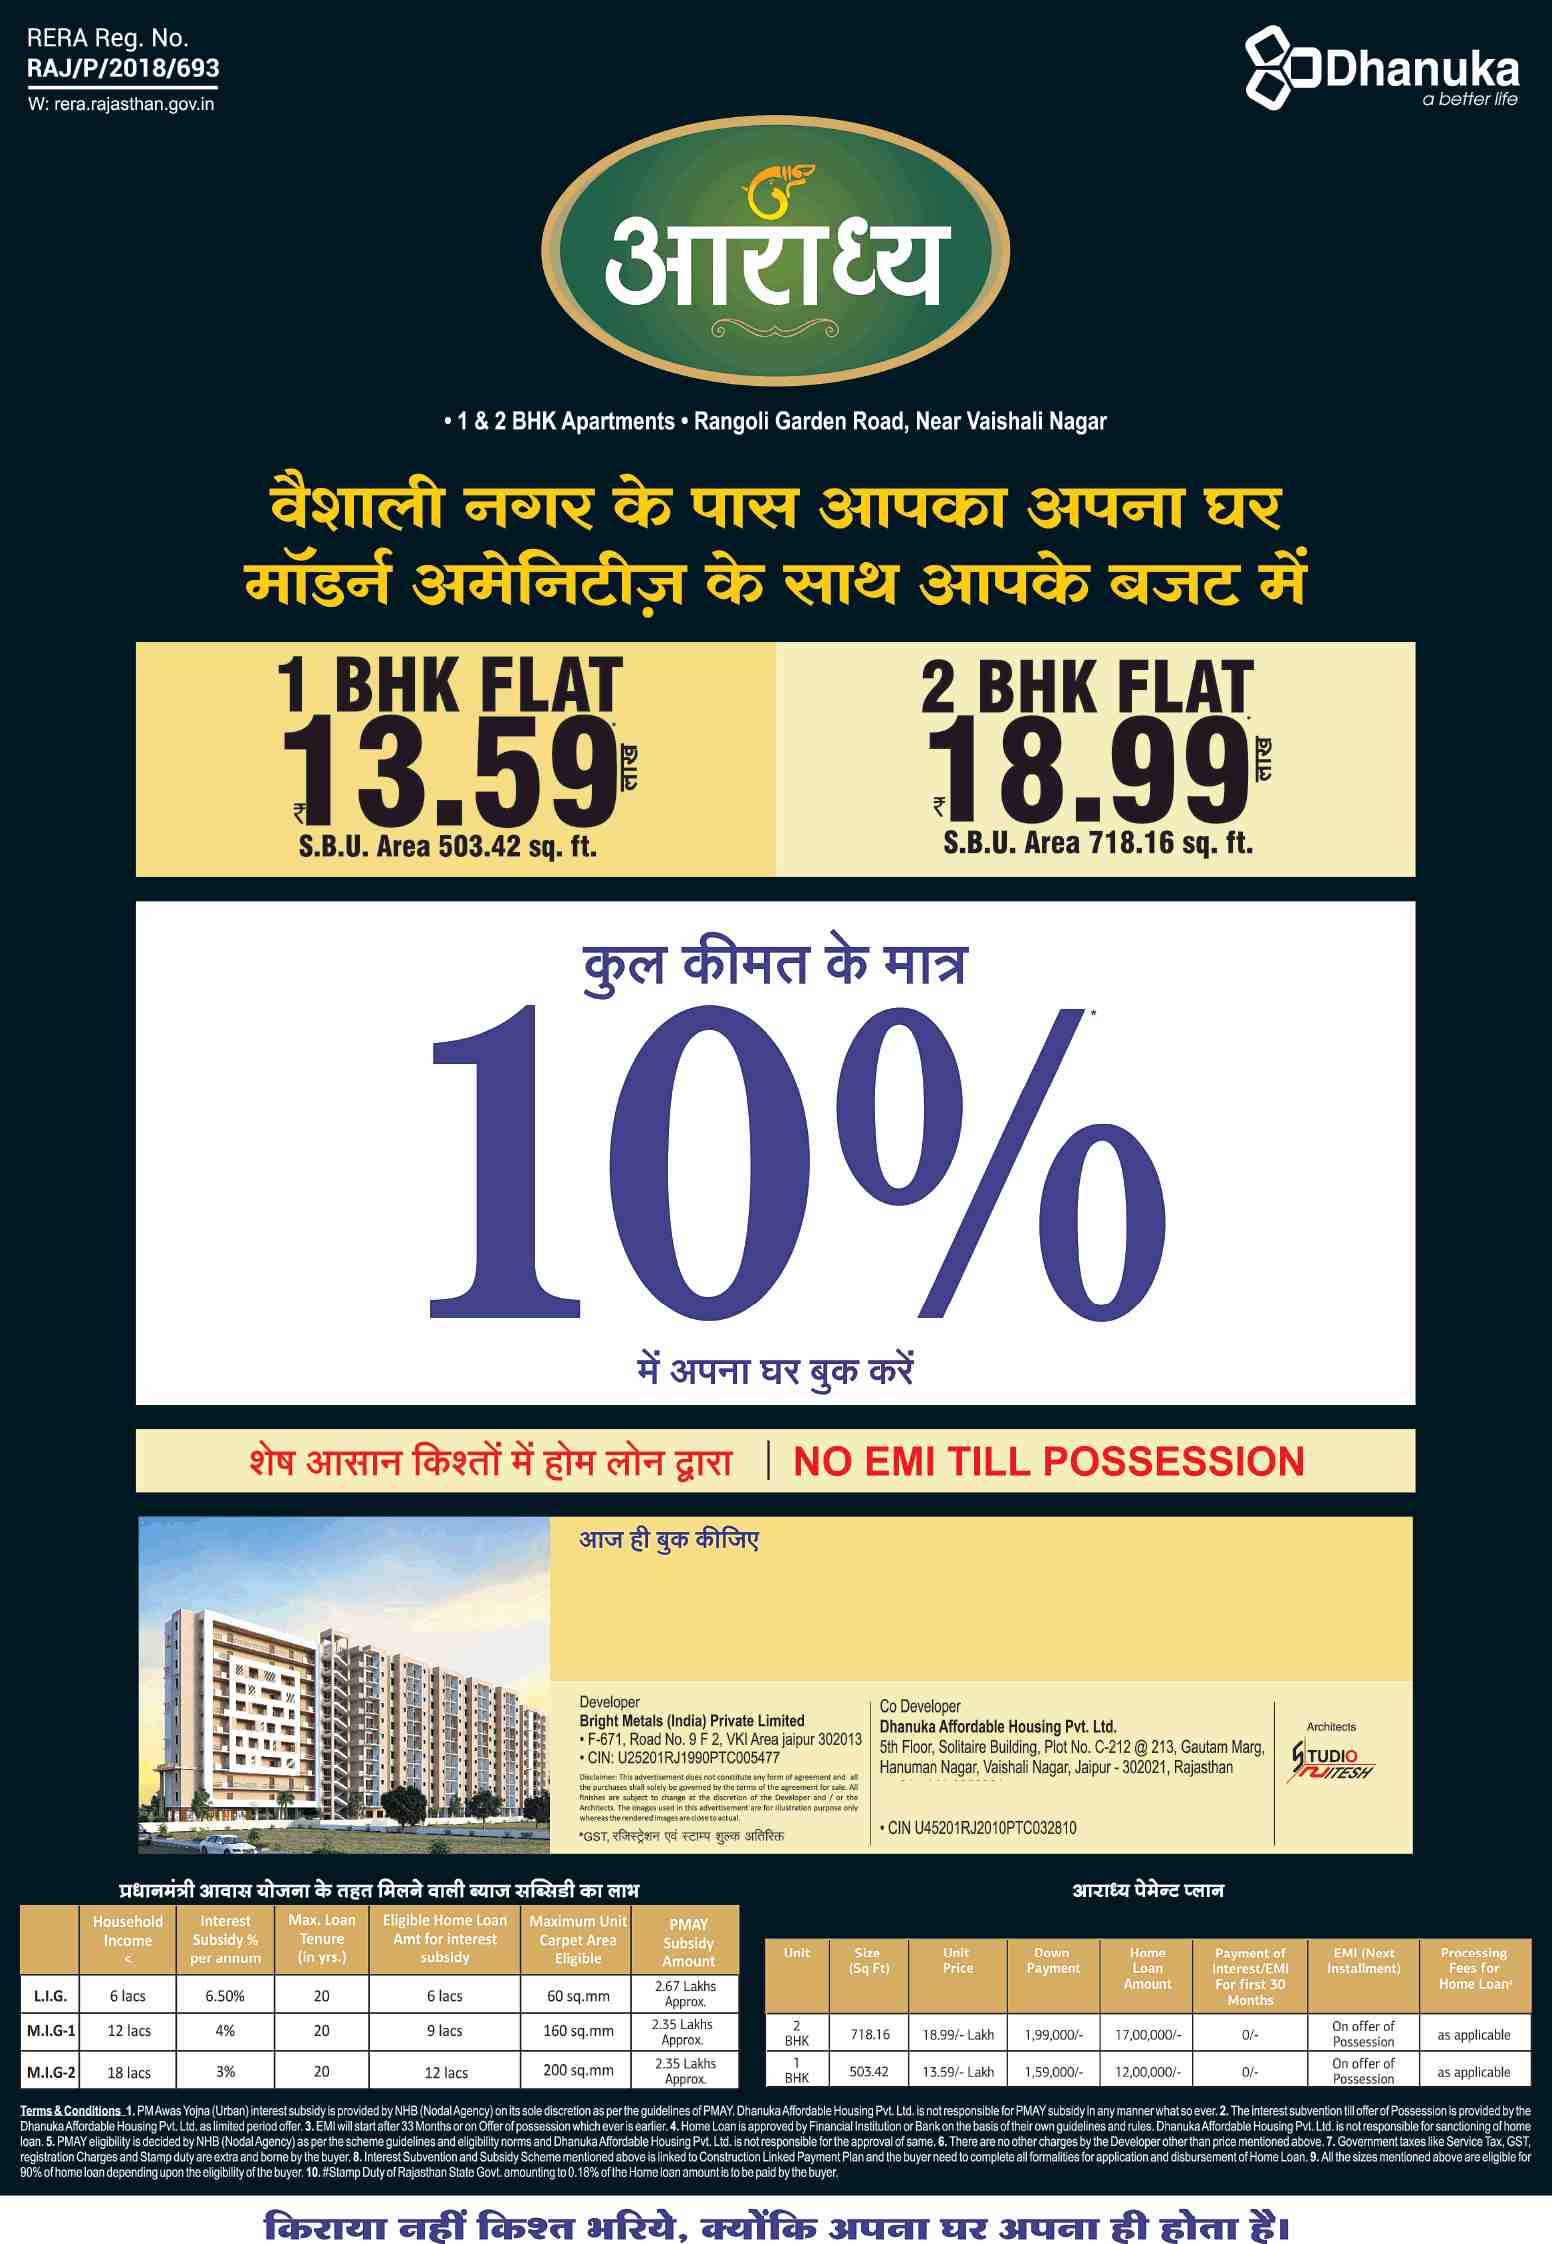 Pay 10% and book your home at Dhanuka Araddhya in Jaipur